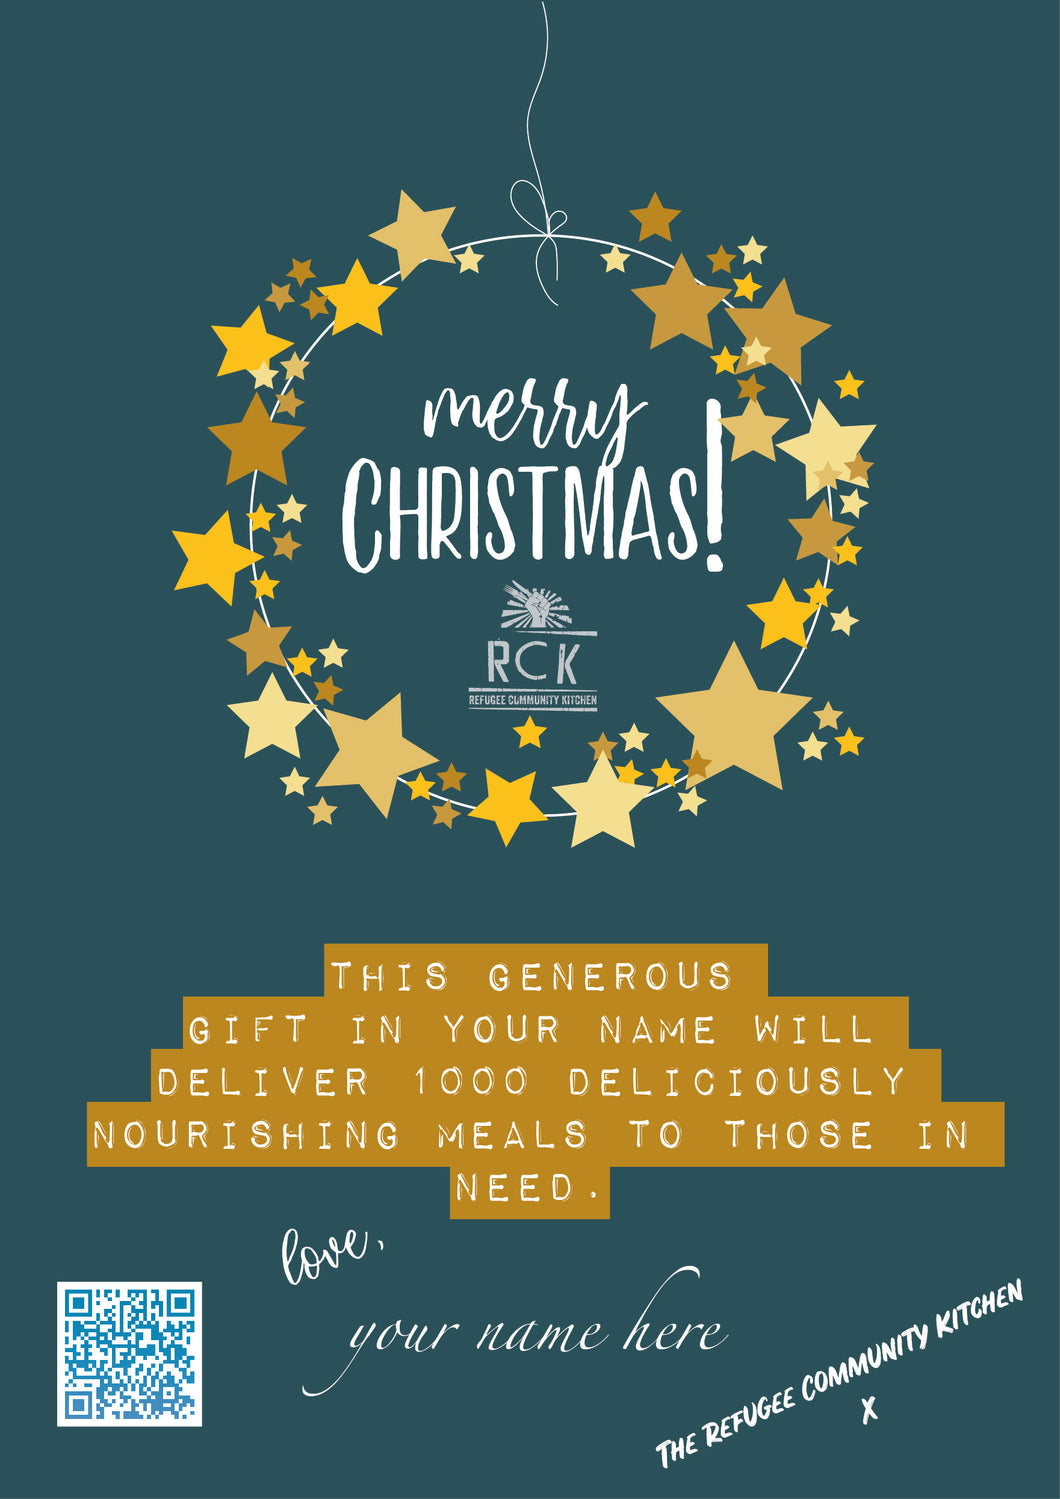 Refugee Community Kitchen Xmas Gift Certificate - Give The Gift of Giving